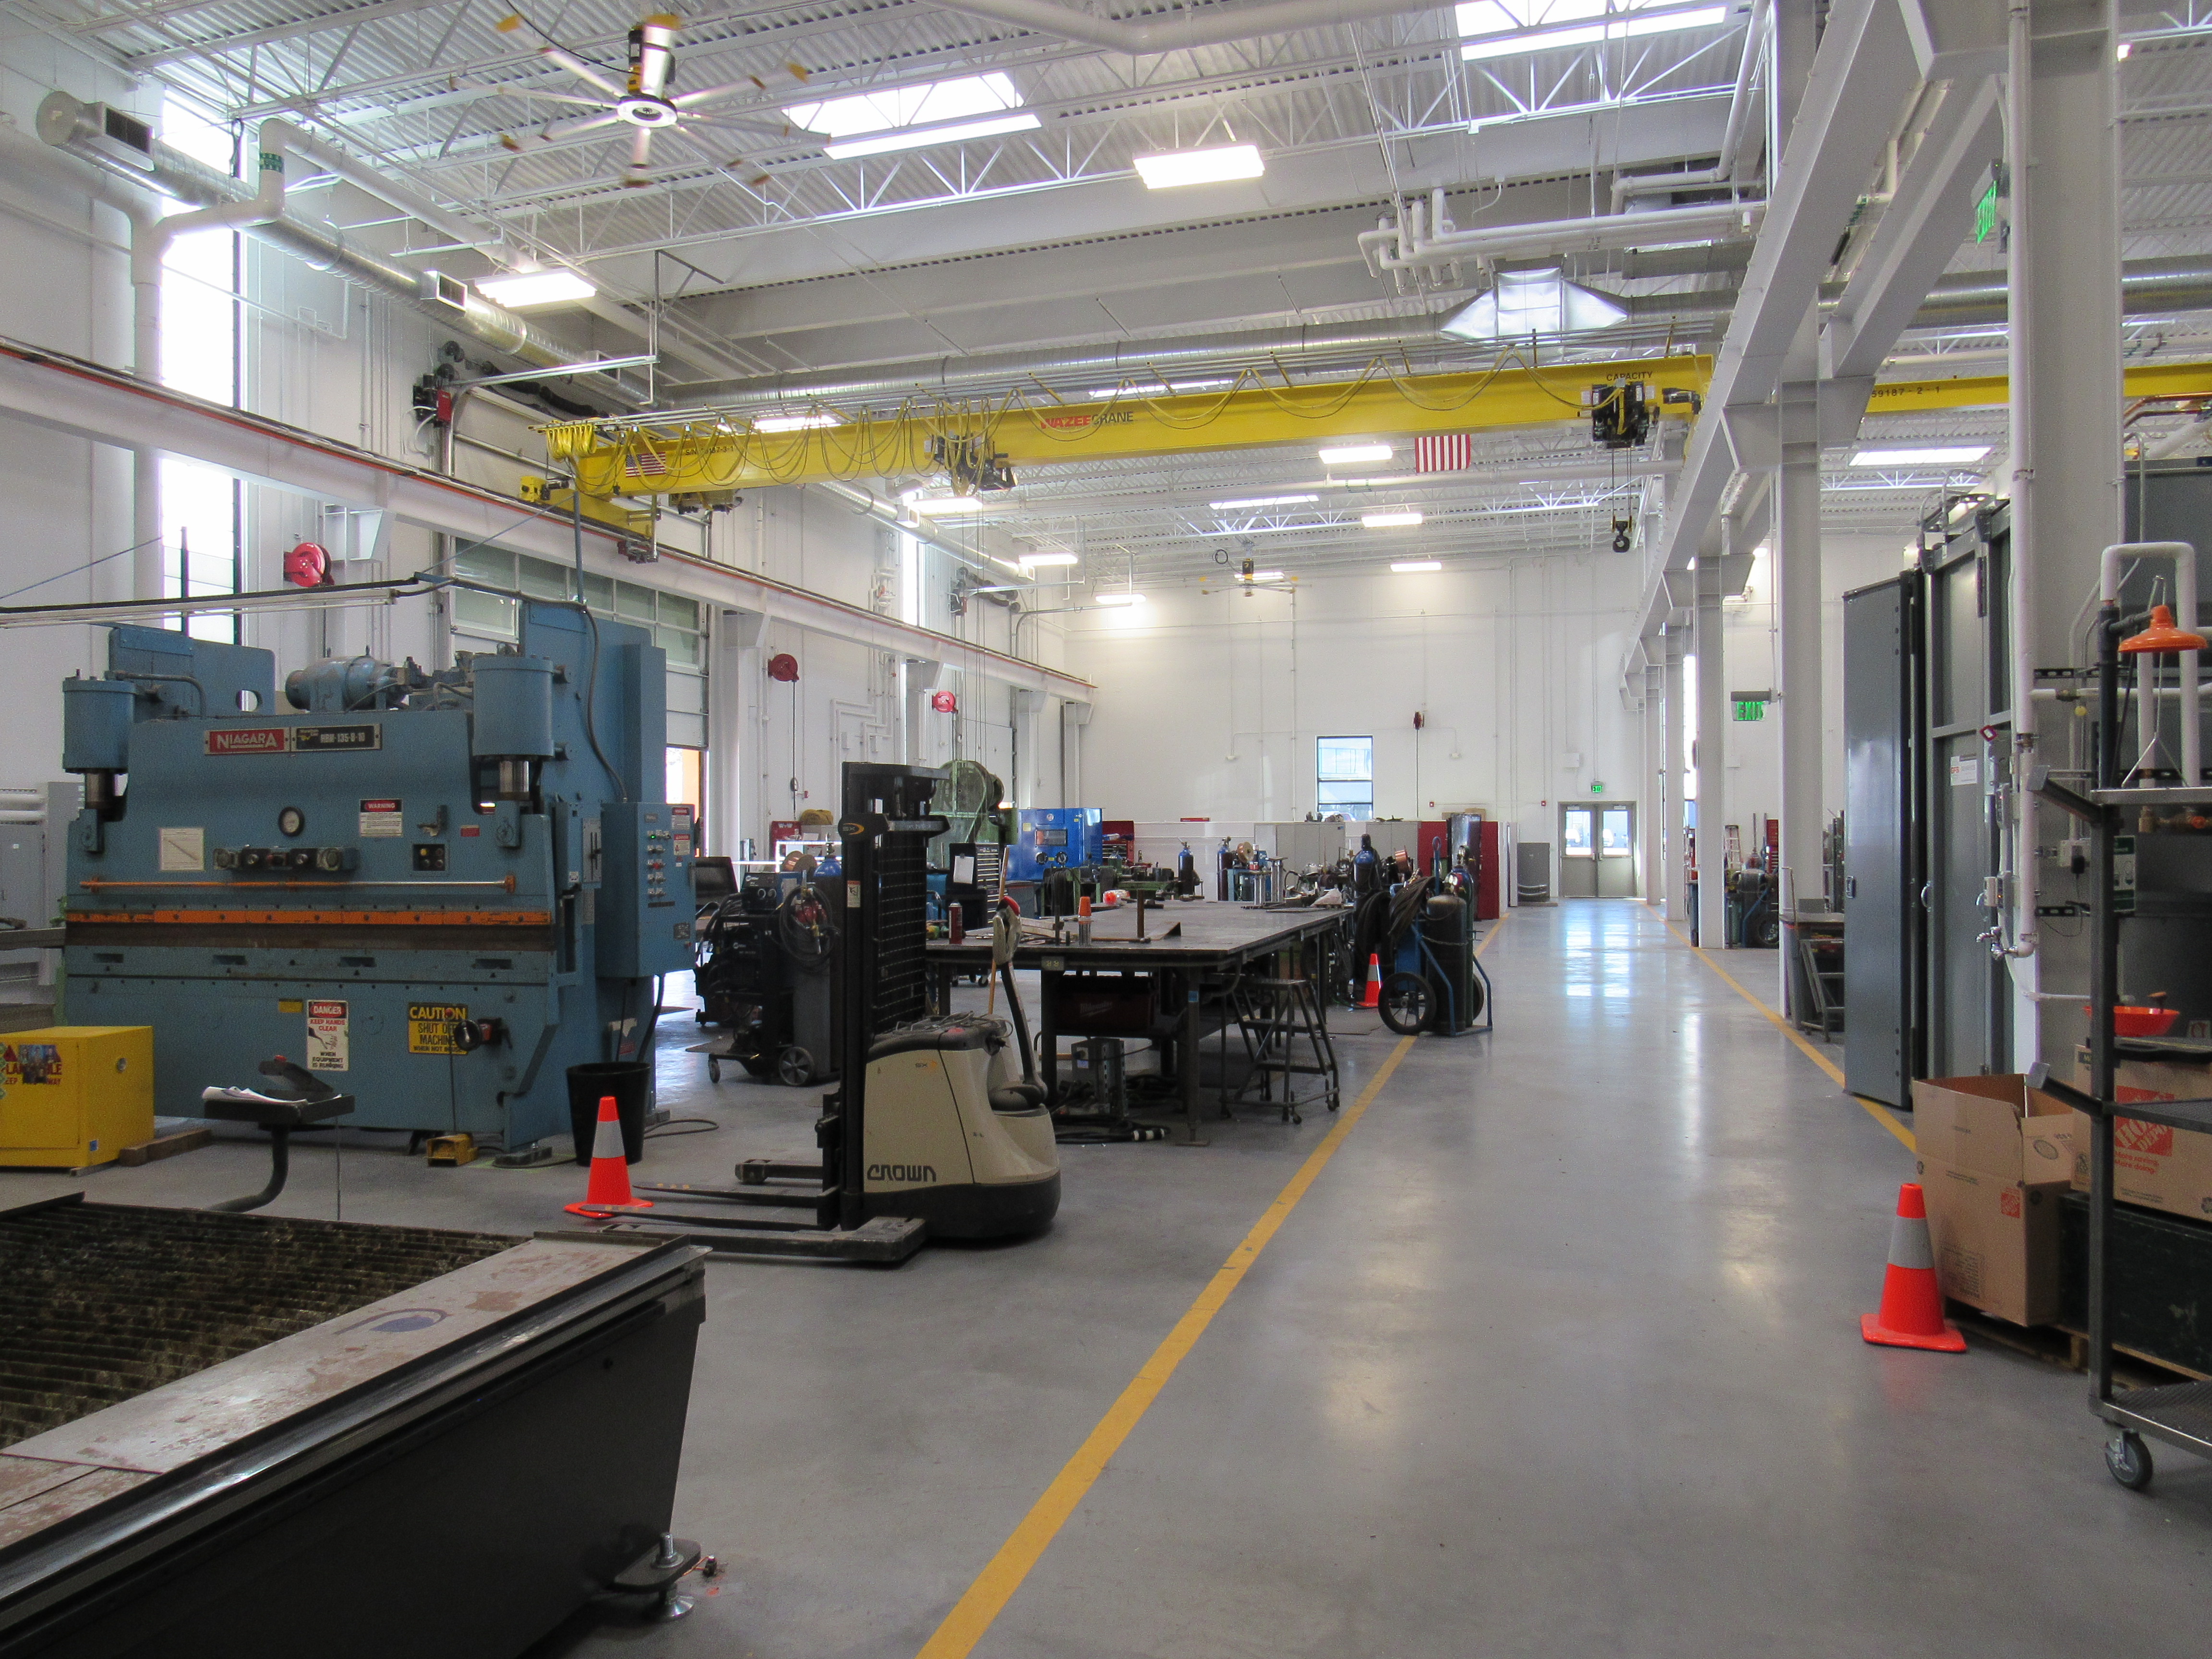 The Trades Shop building brings functions like electricians, plumbers and welders all under one roof. Photo credit: Denver Water.